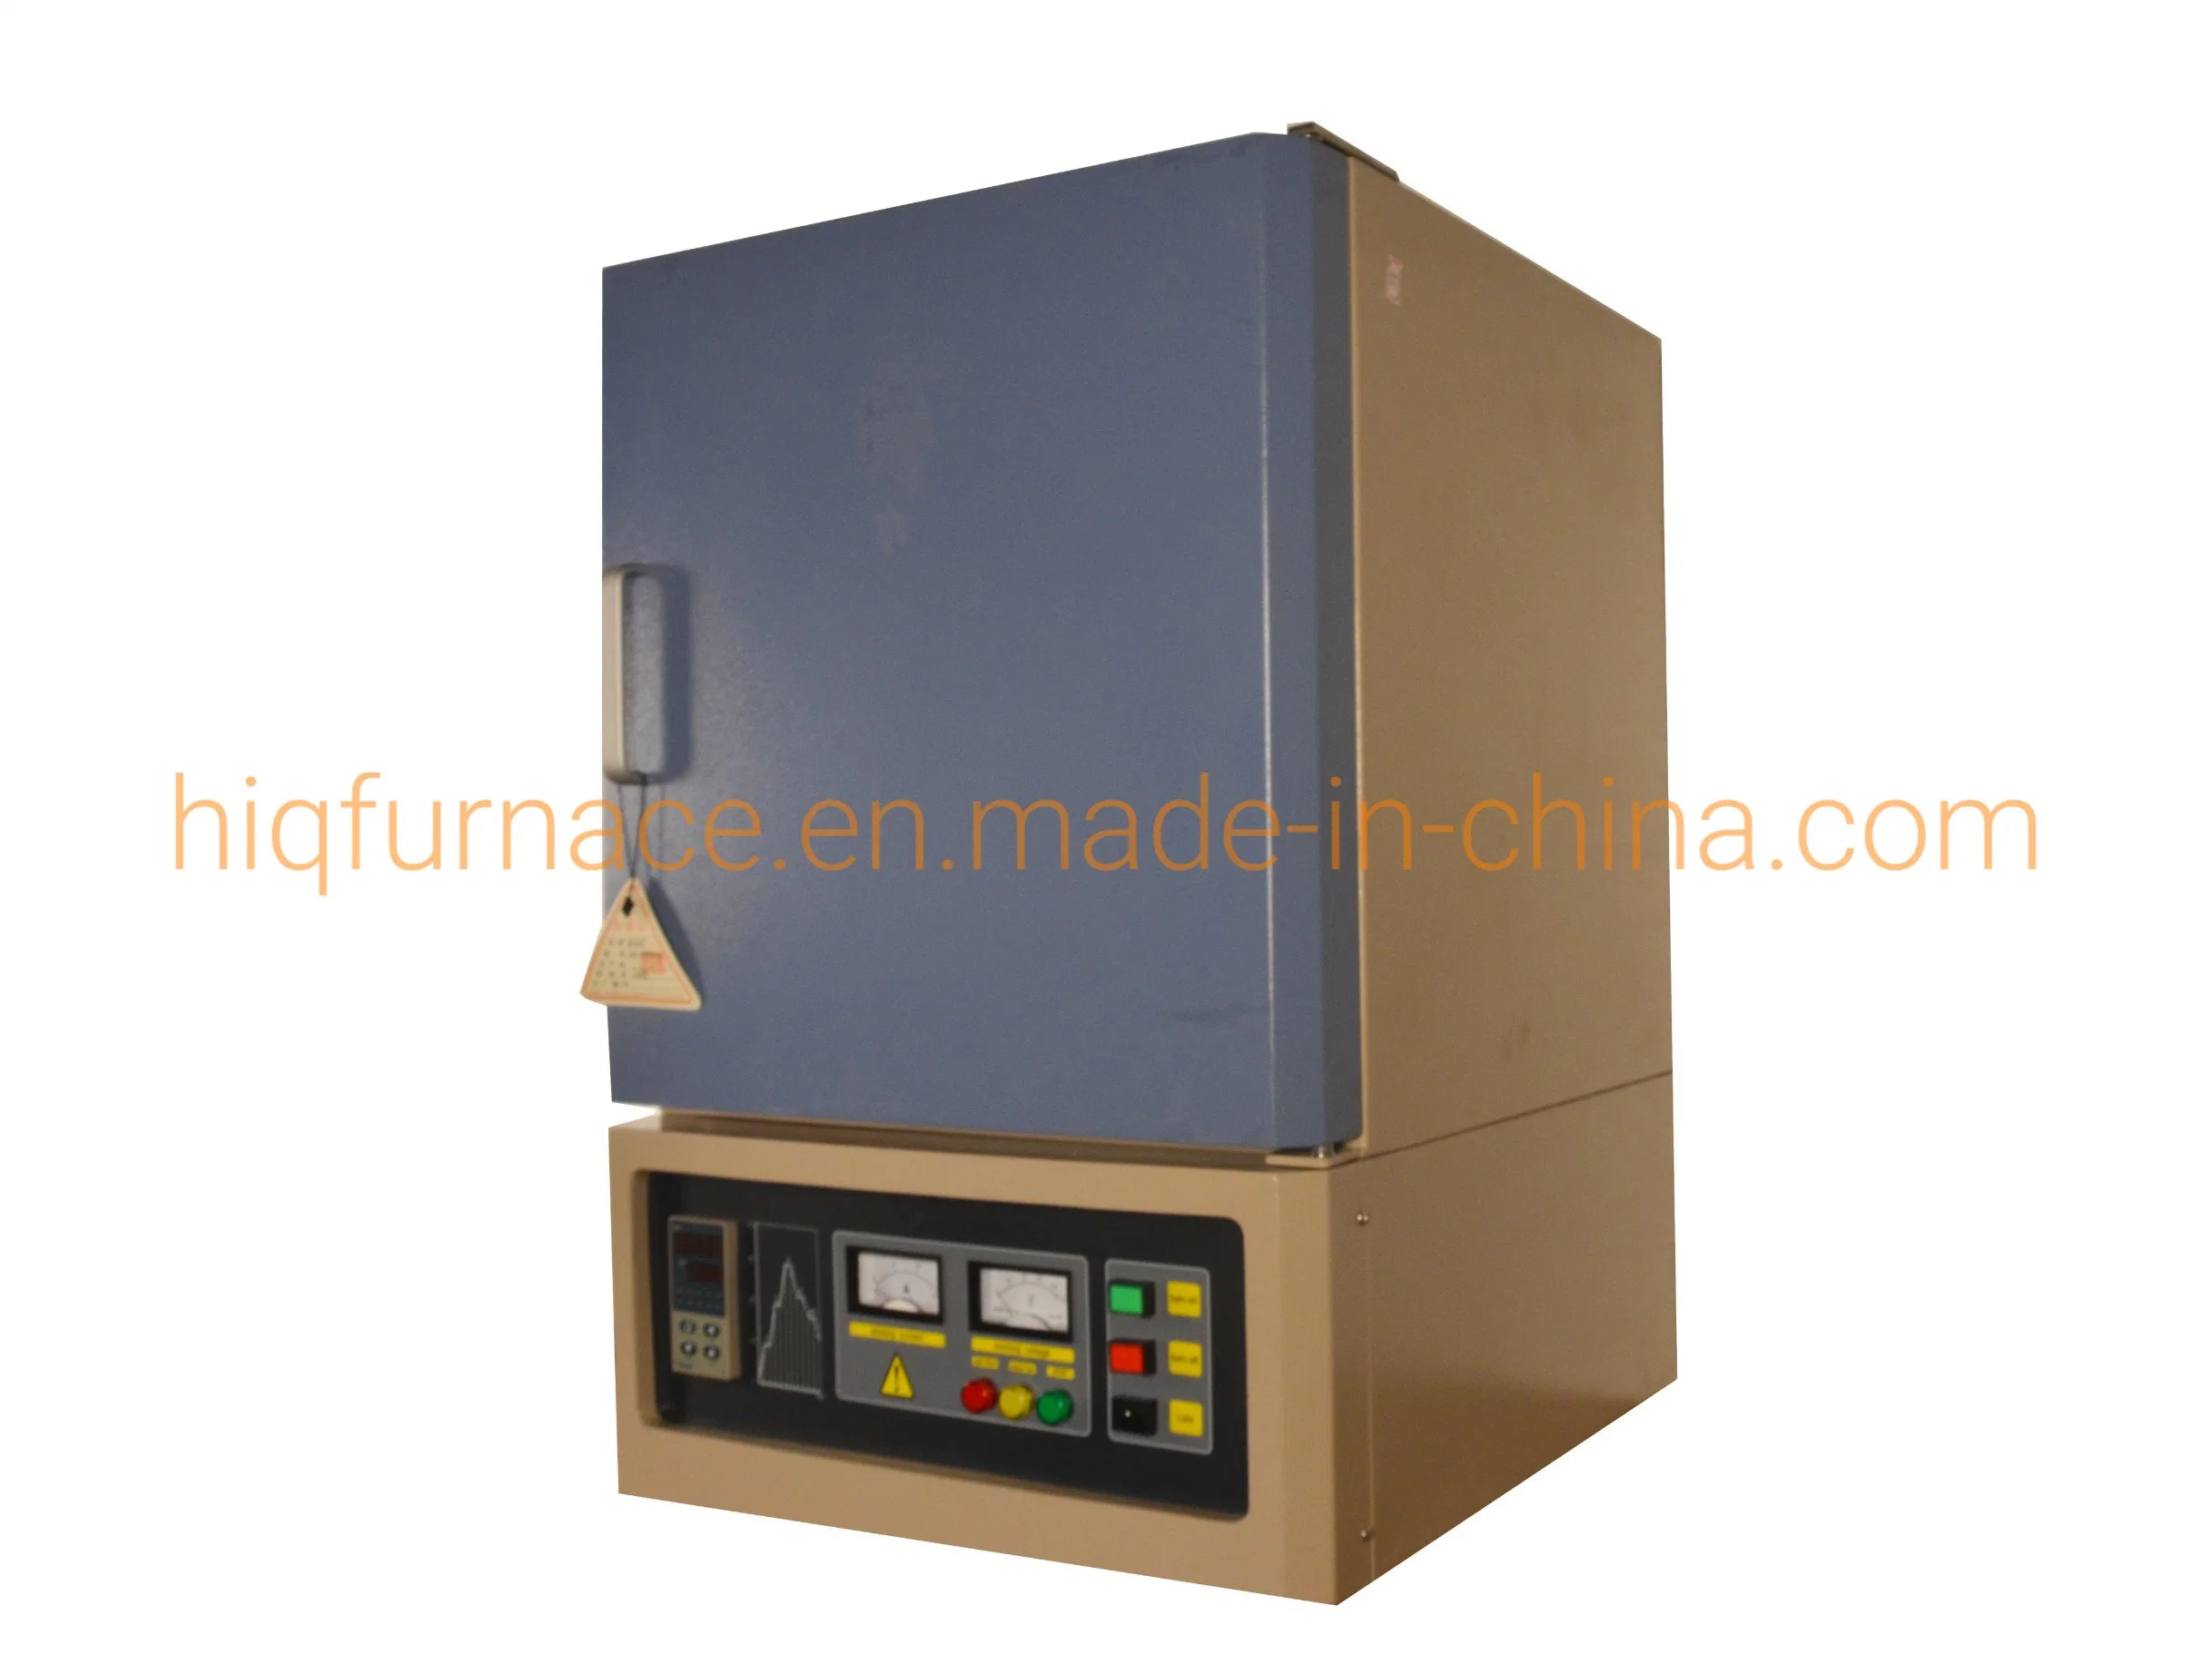 Box-Type Electric Resistance Furnace, High Quality Muffle Furnace for Laboratory Heat Treatment